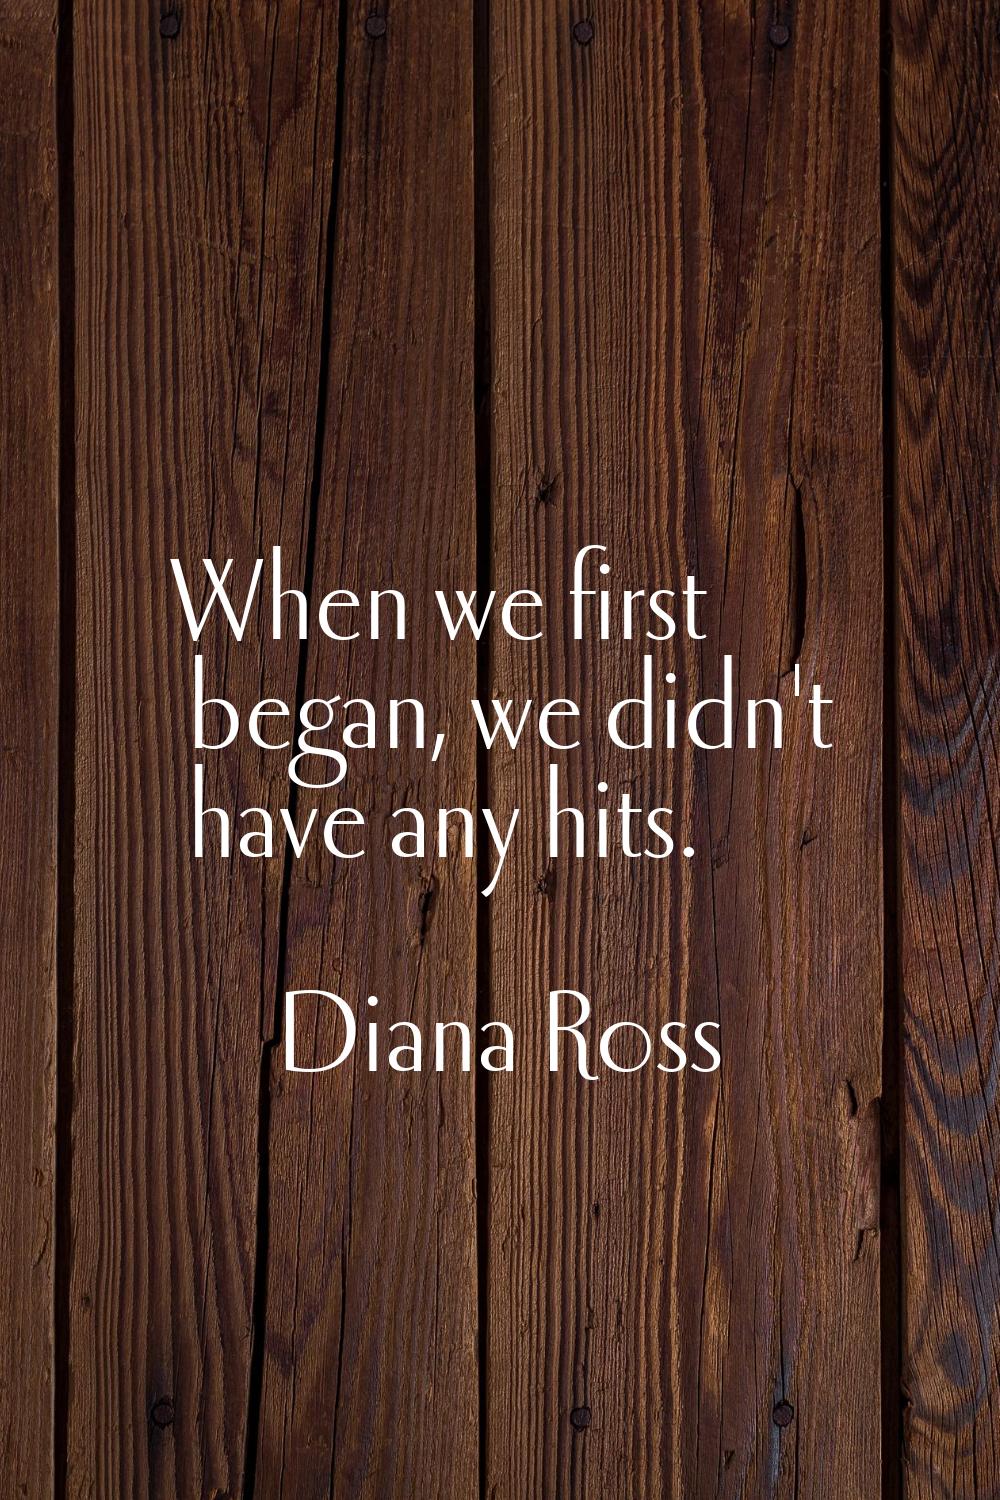 When we first began, we didn't have any hits.